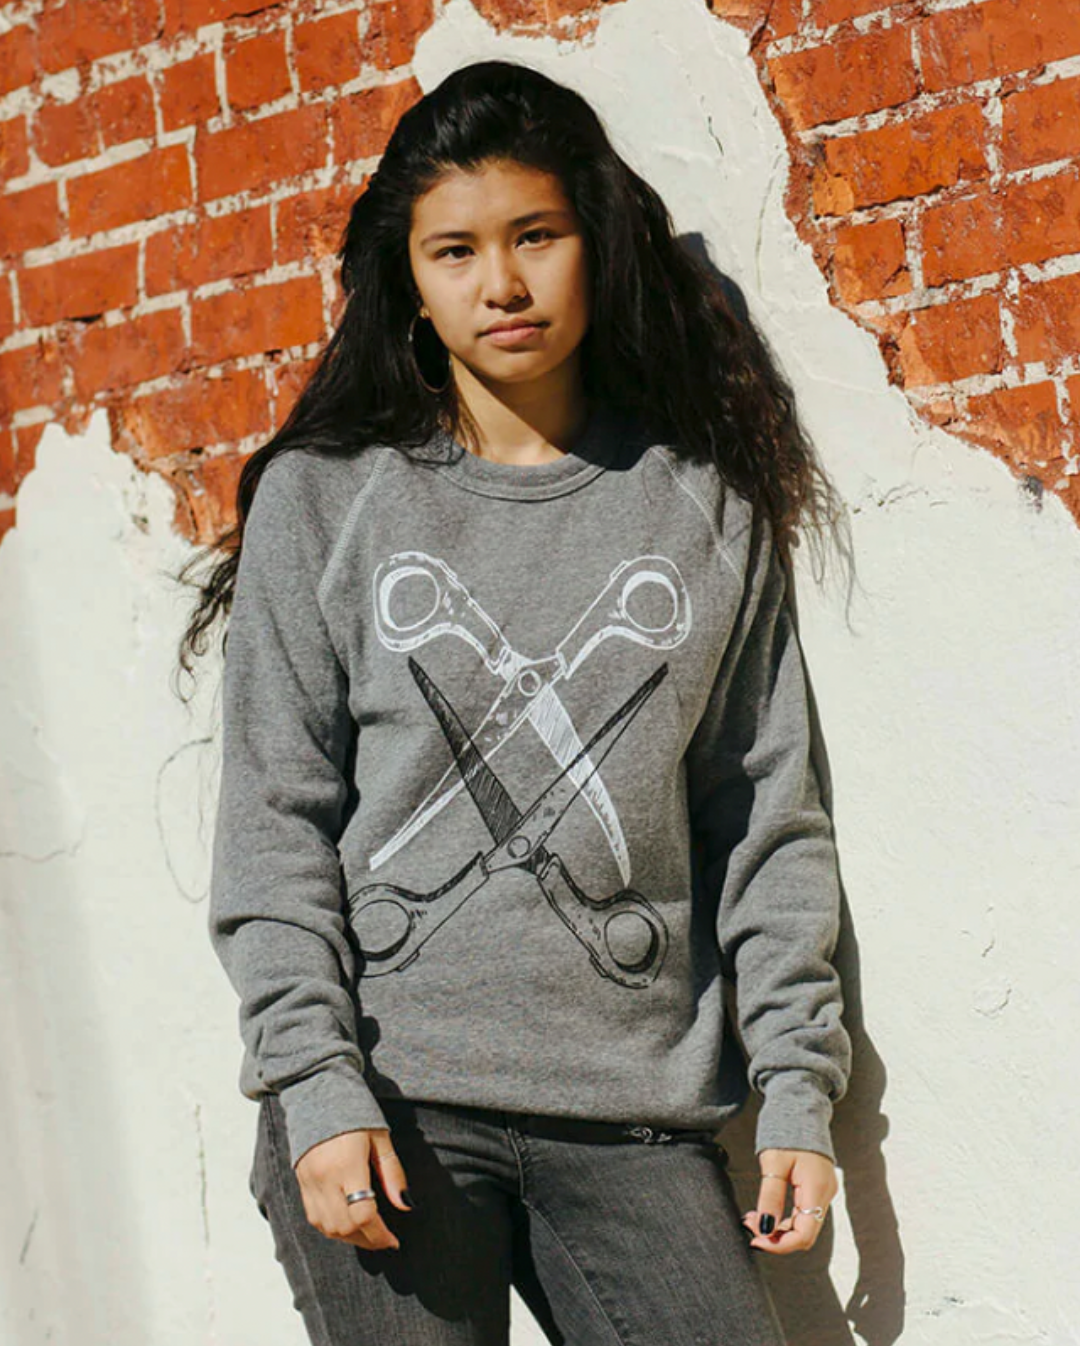 Model Jordan is wearing the Basic Scissoring Sweatshirt in size S. She is 5'3" and her bra size is 34B. The sweatshirt is grey with a graphic of two scissors in a vertical alignment. Their blades are open and overlapping each other. The top scissor is white and the bottom is black.